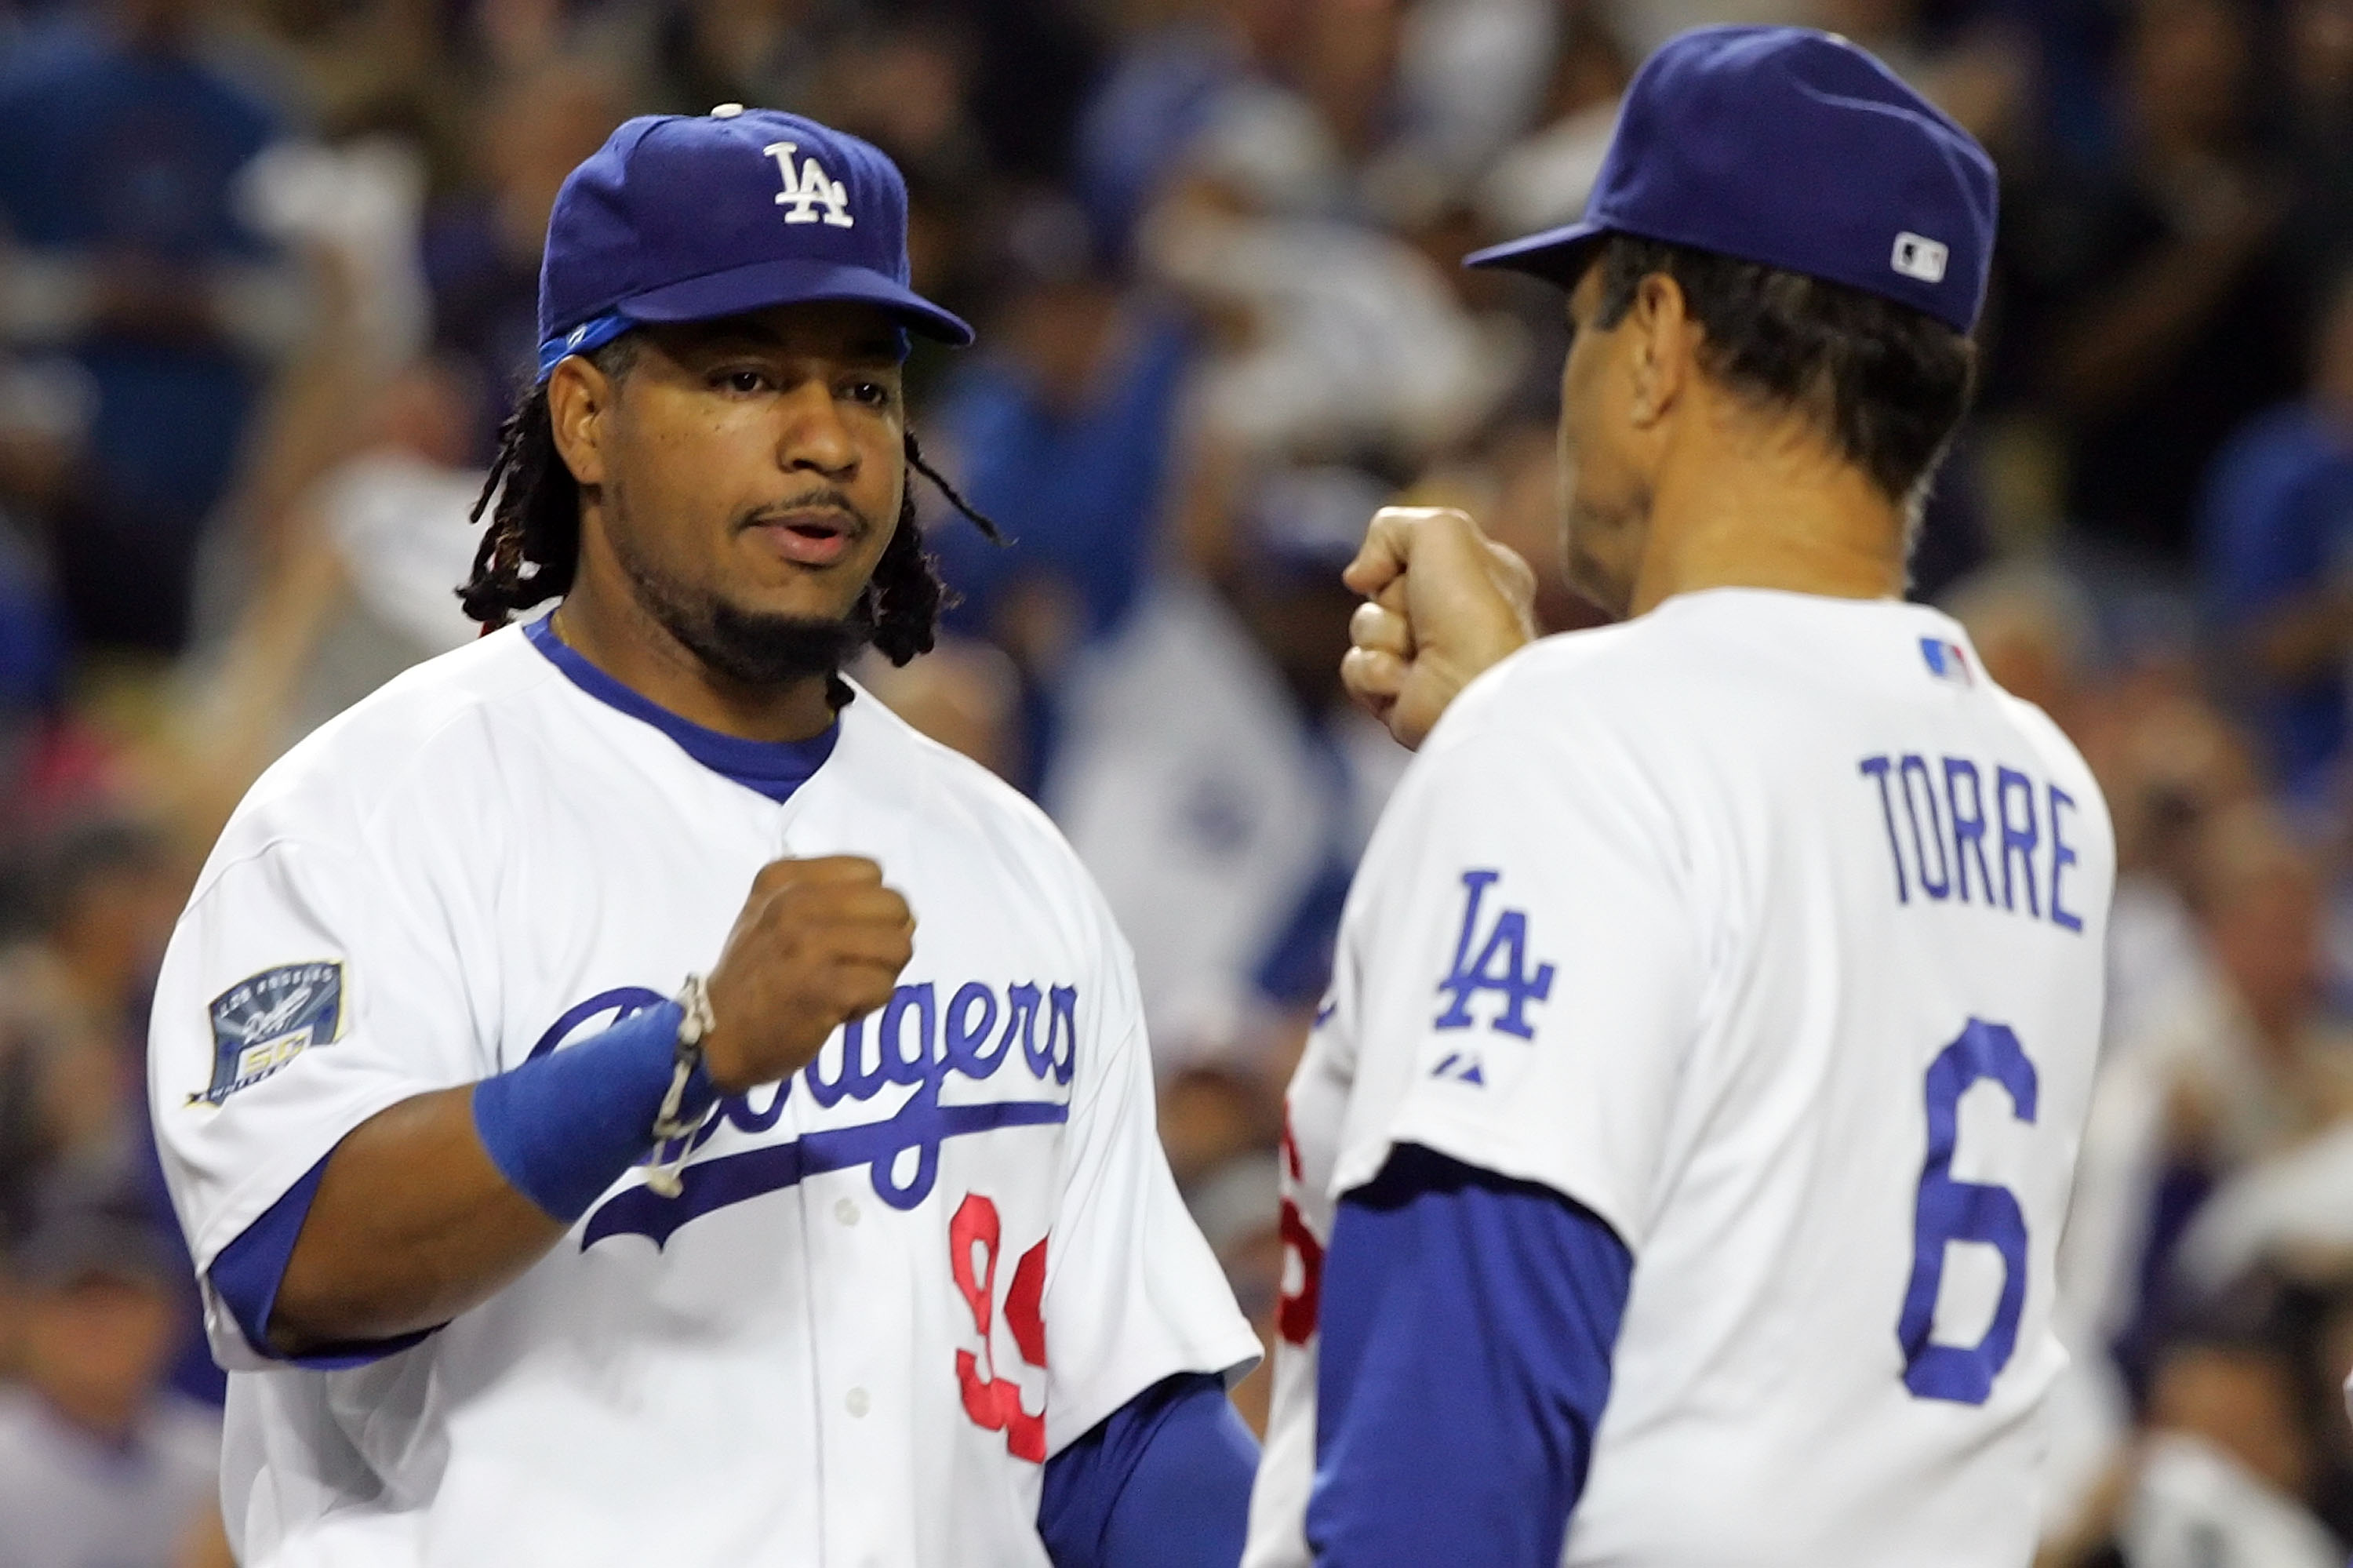 Manny Ramirez To The Rays: Five Reasons Tampa Bay Should Reel Him